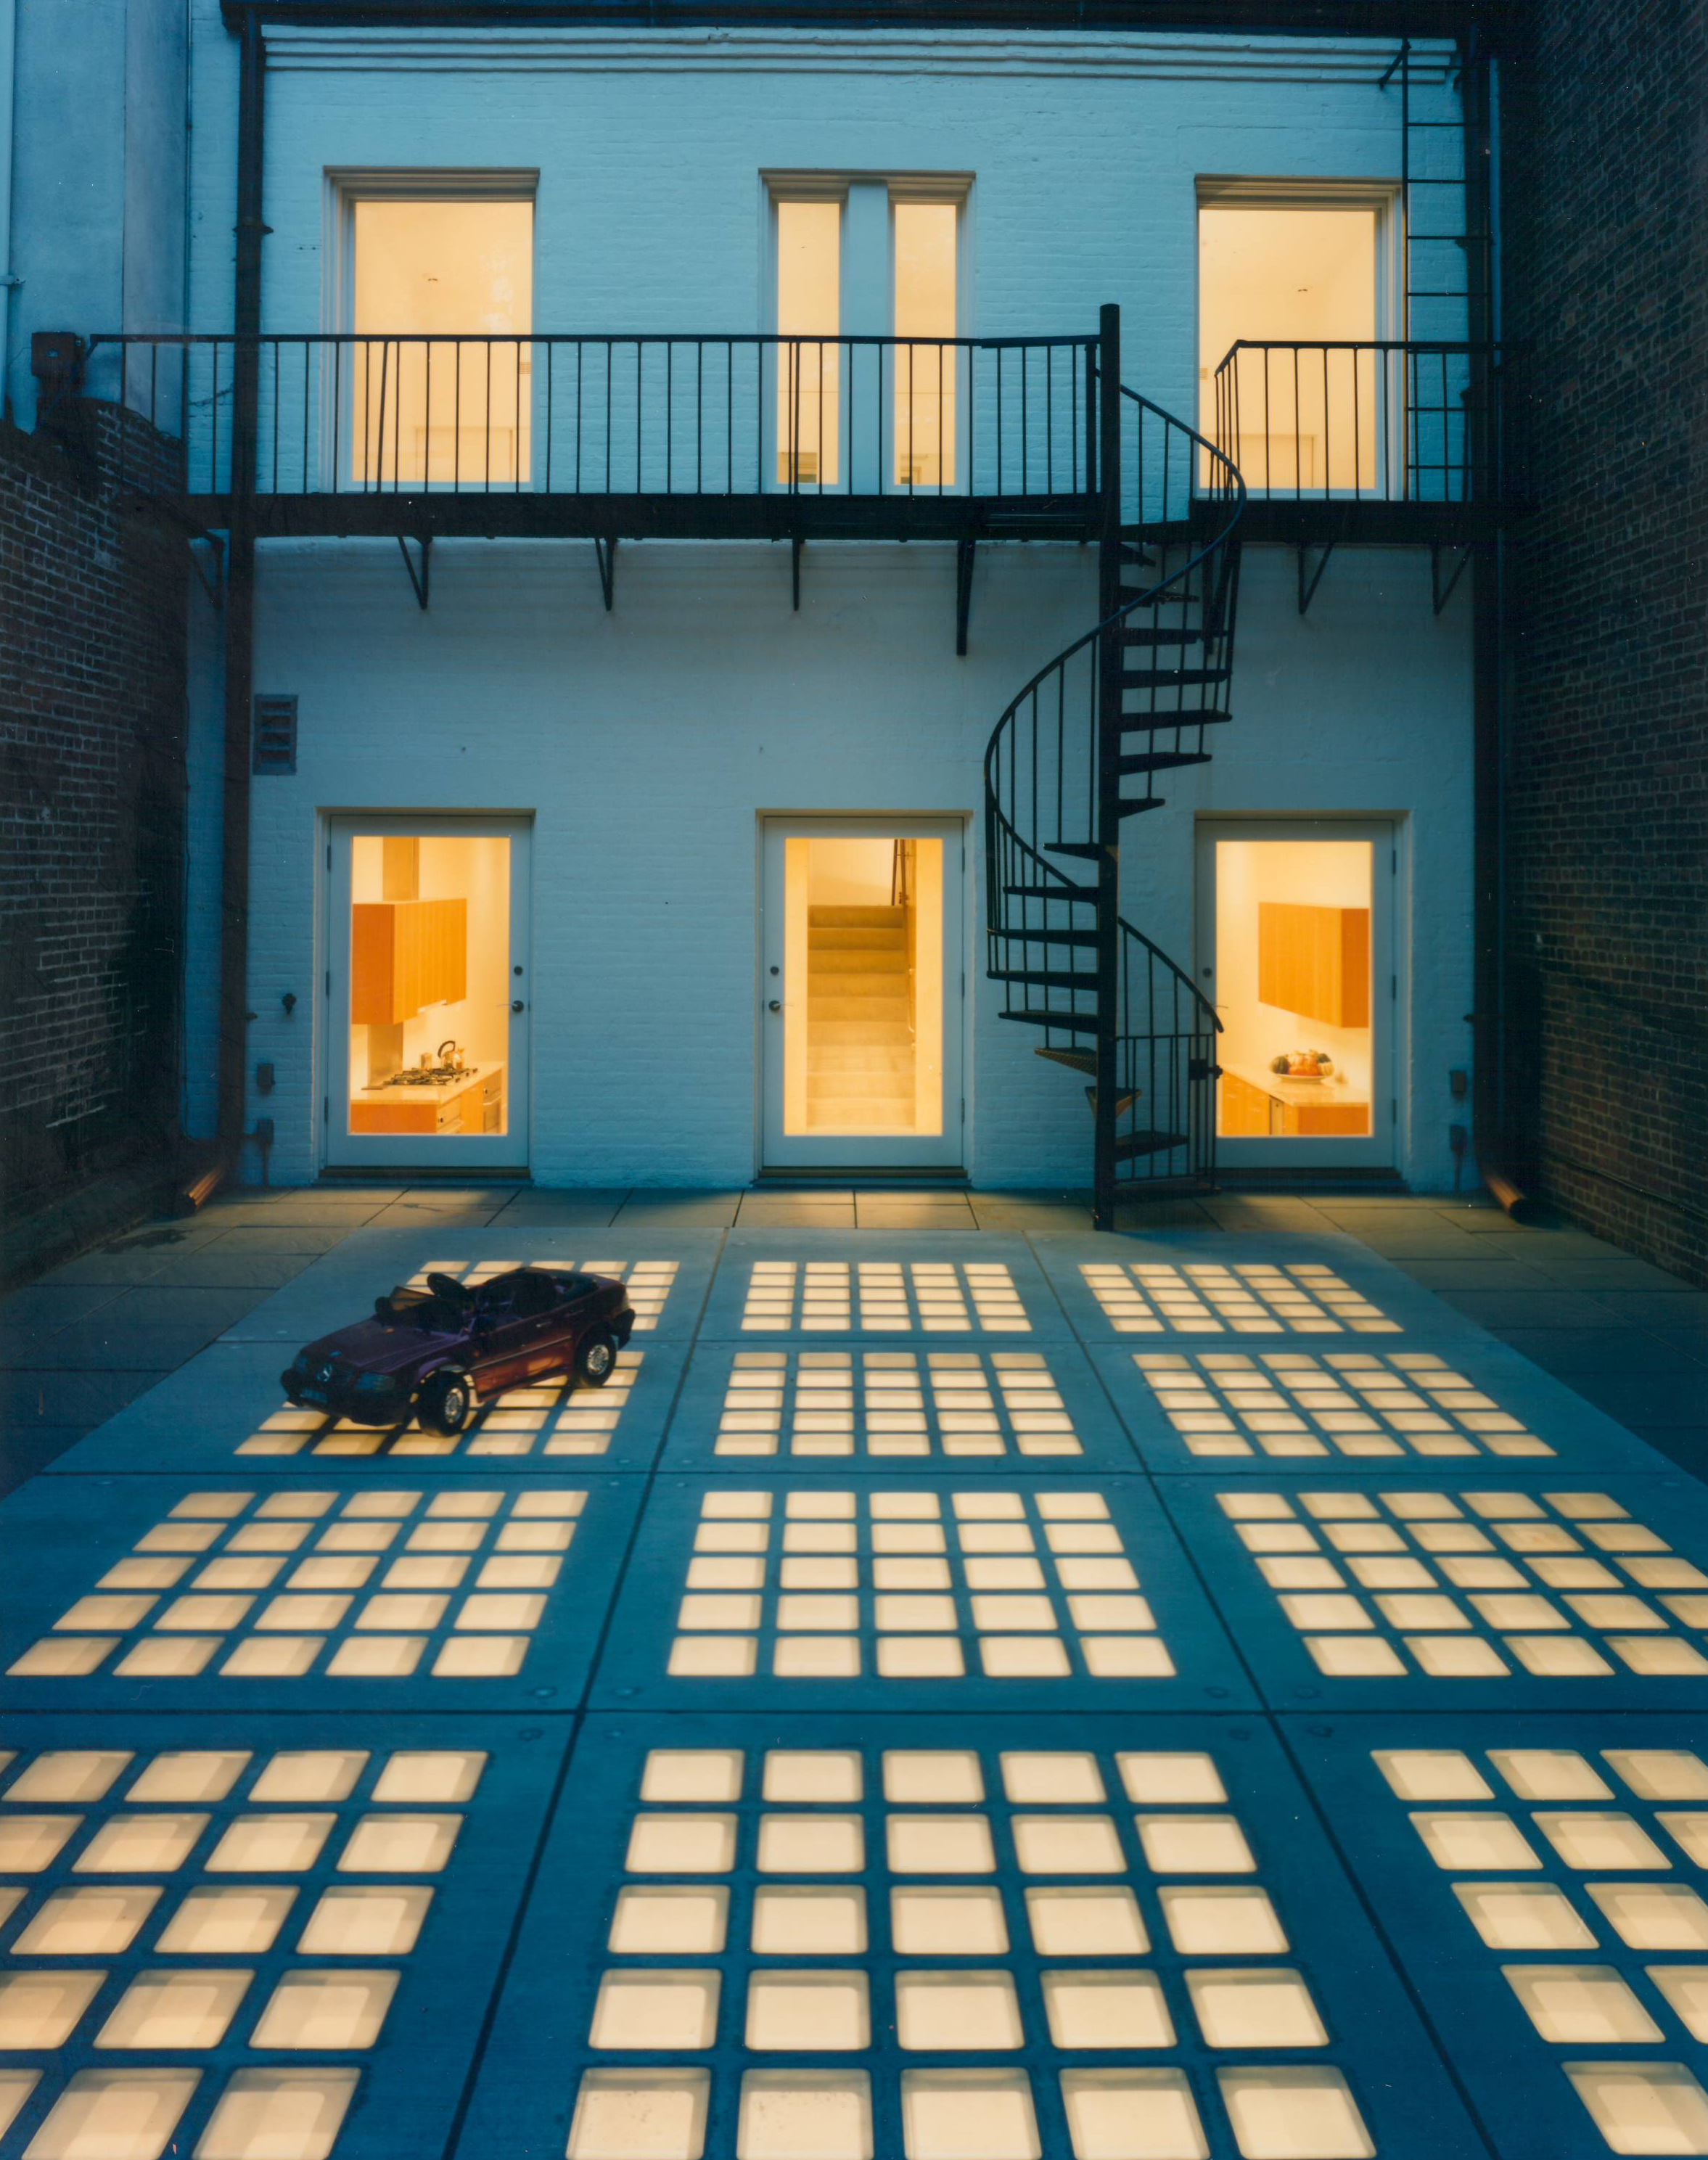  East 69th St. Carriage House, Robert Lipson Architect 